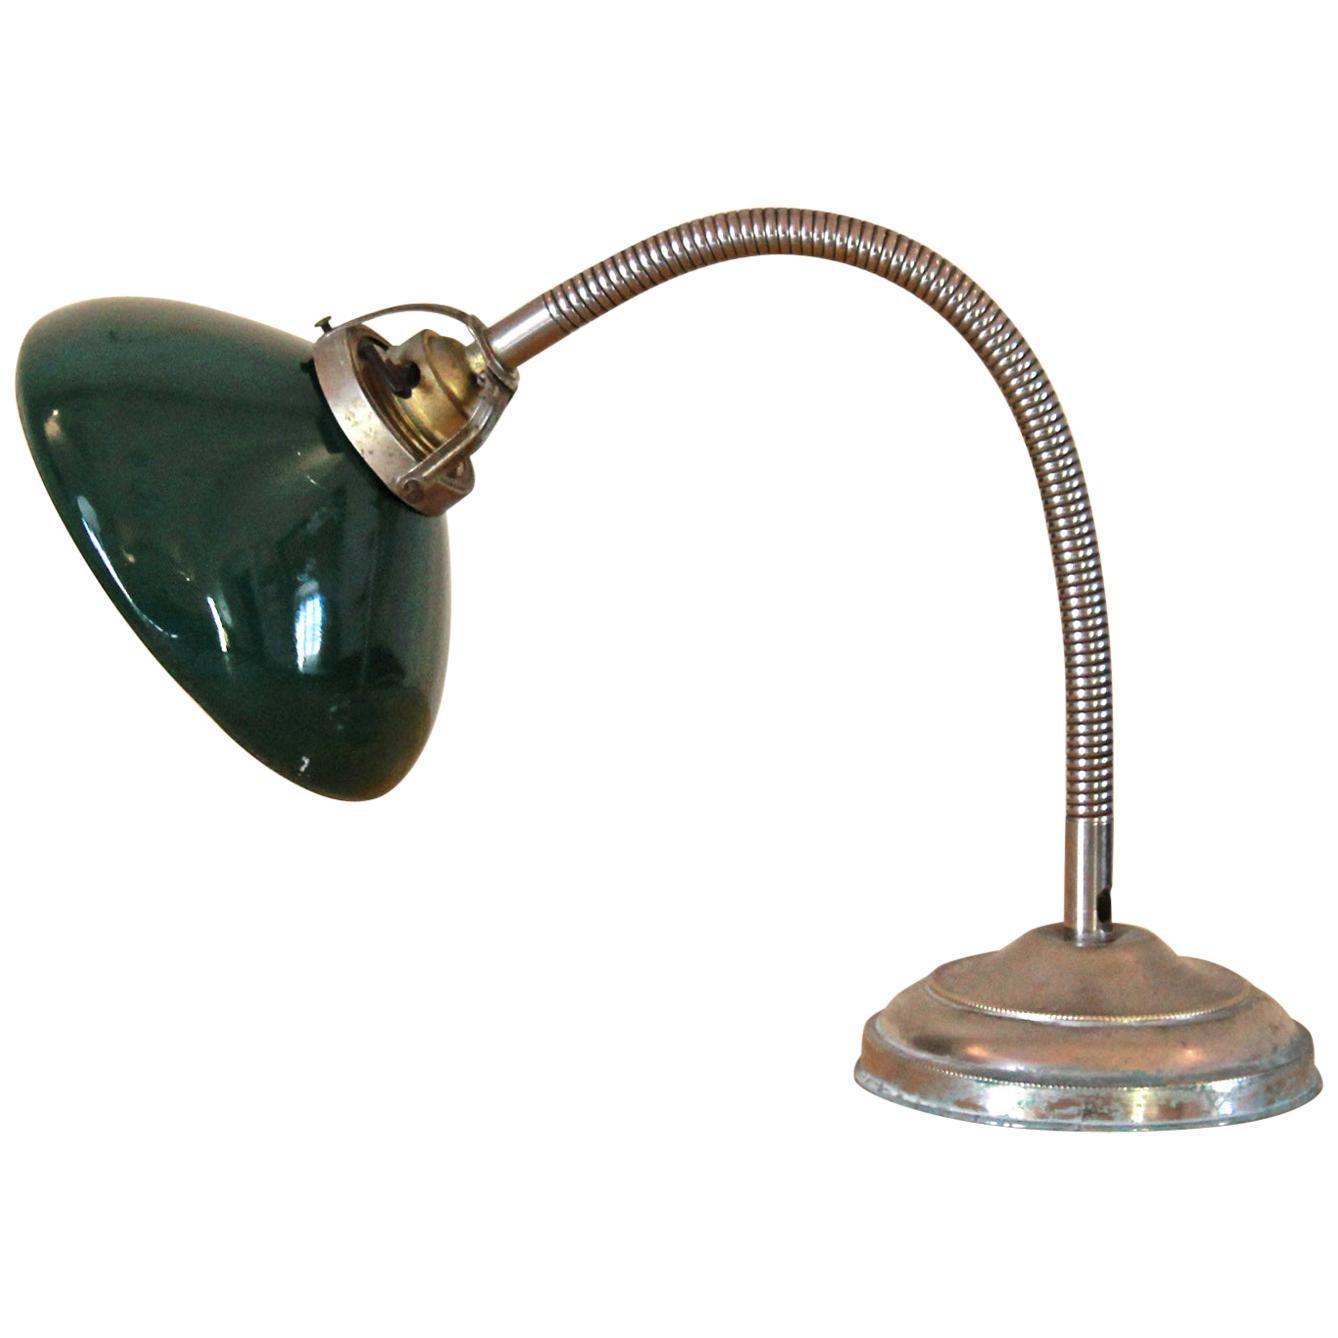 Vintage Lamp in Bauhaus Style Citmf Branded from the Early 20th Century